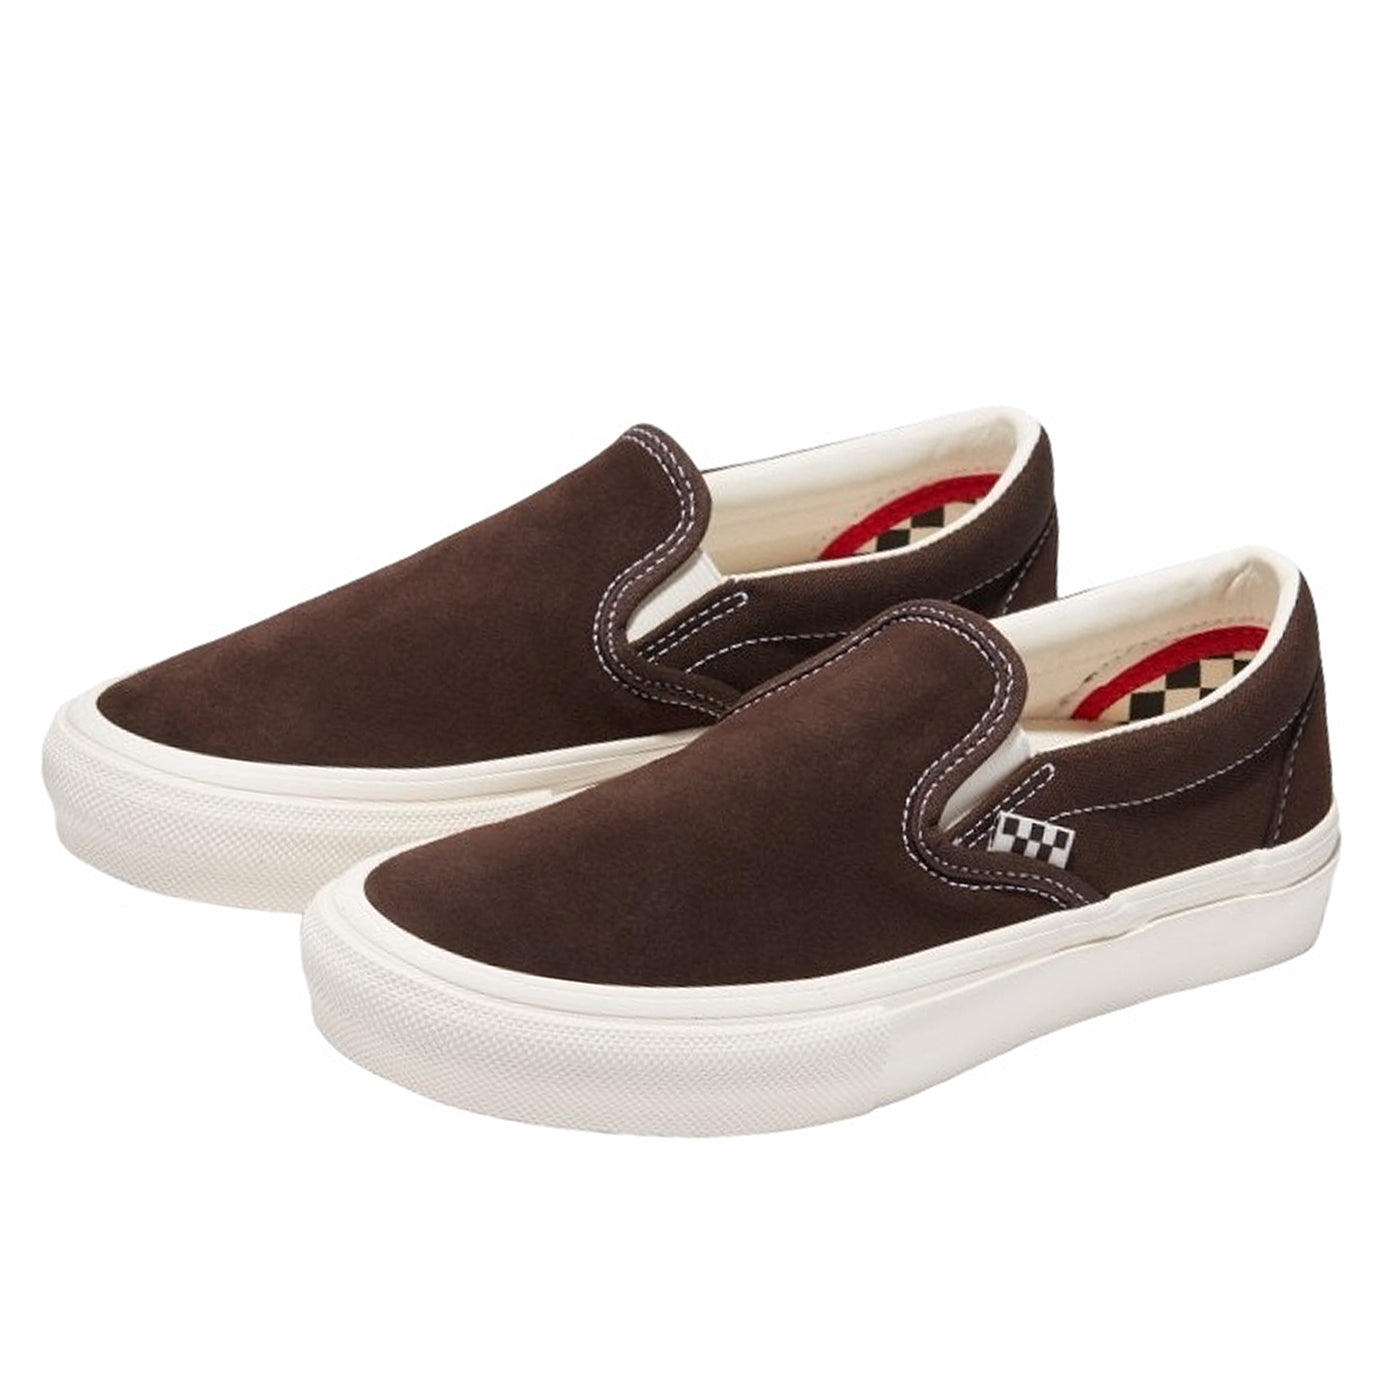 Brown vans slip on skate shoes with white soles and checkered tab. Free uk  shipping over £50